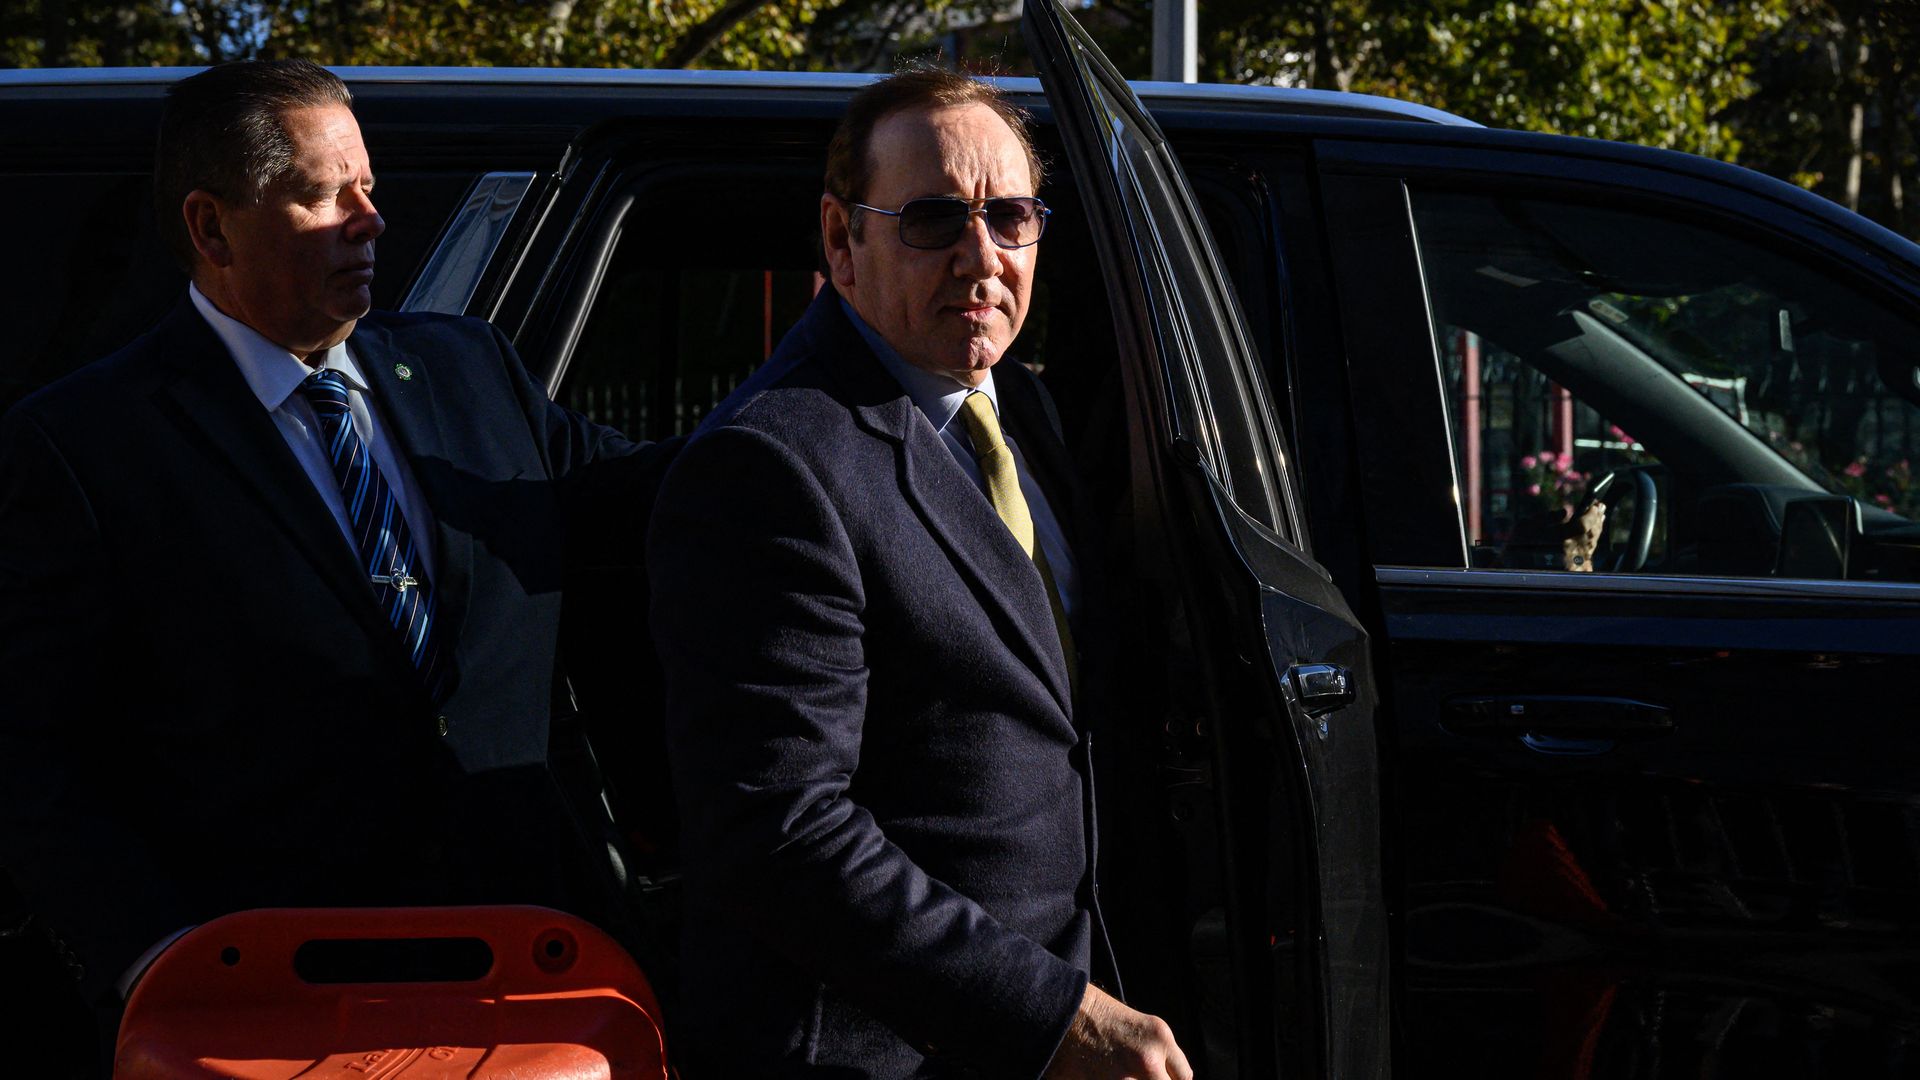 ctor Kevin Spacey arrives at United States District Court for the Southern District of New York.